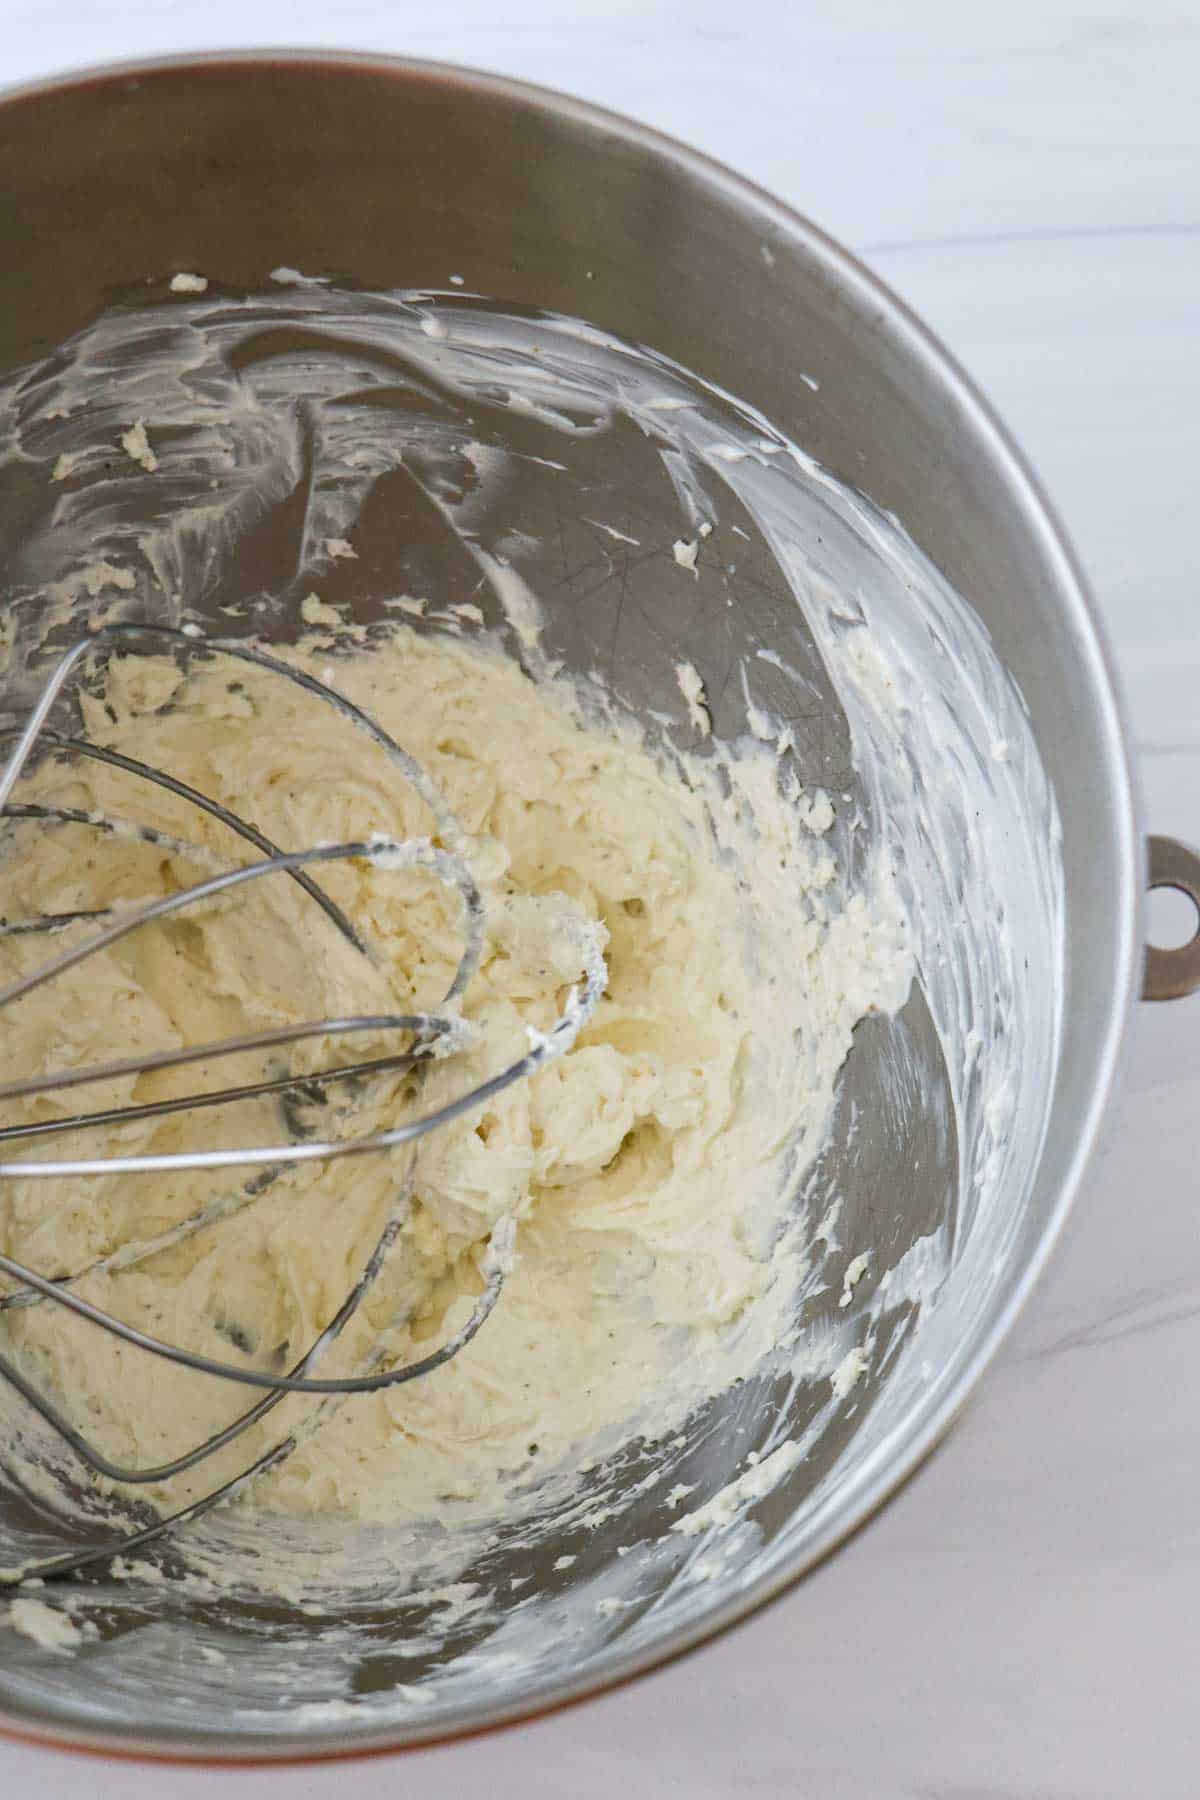 Cream cheese in a mixer bowl with a whisk attachment.